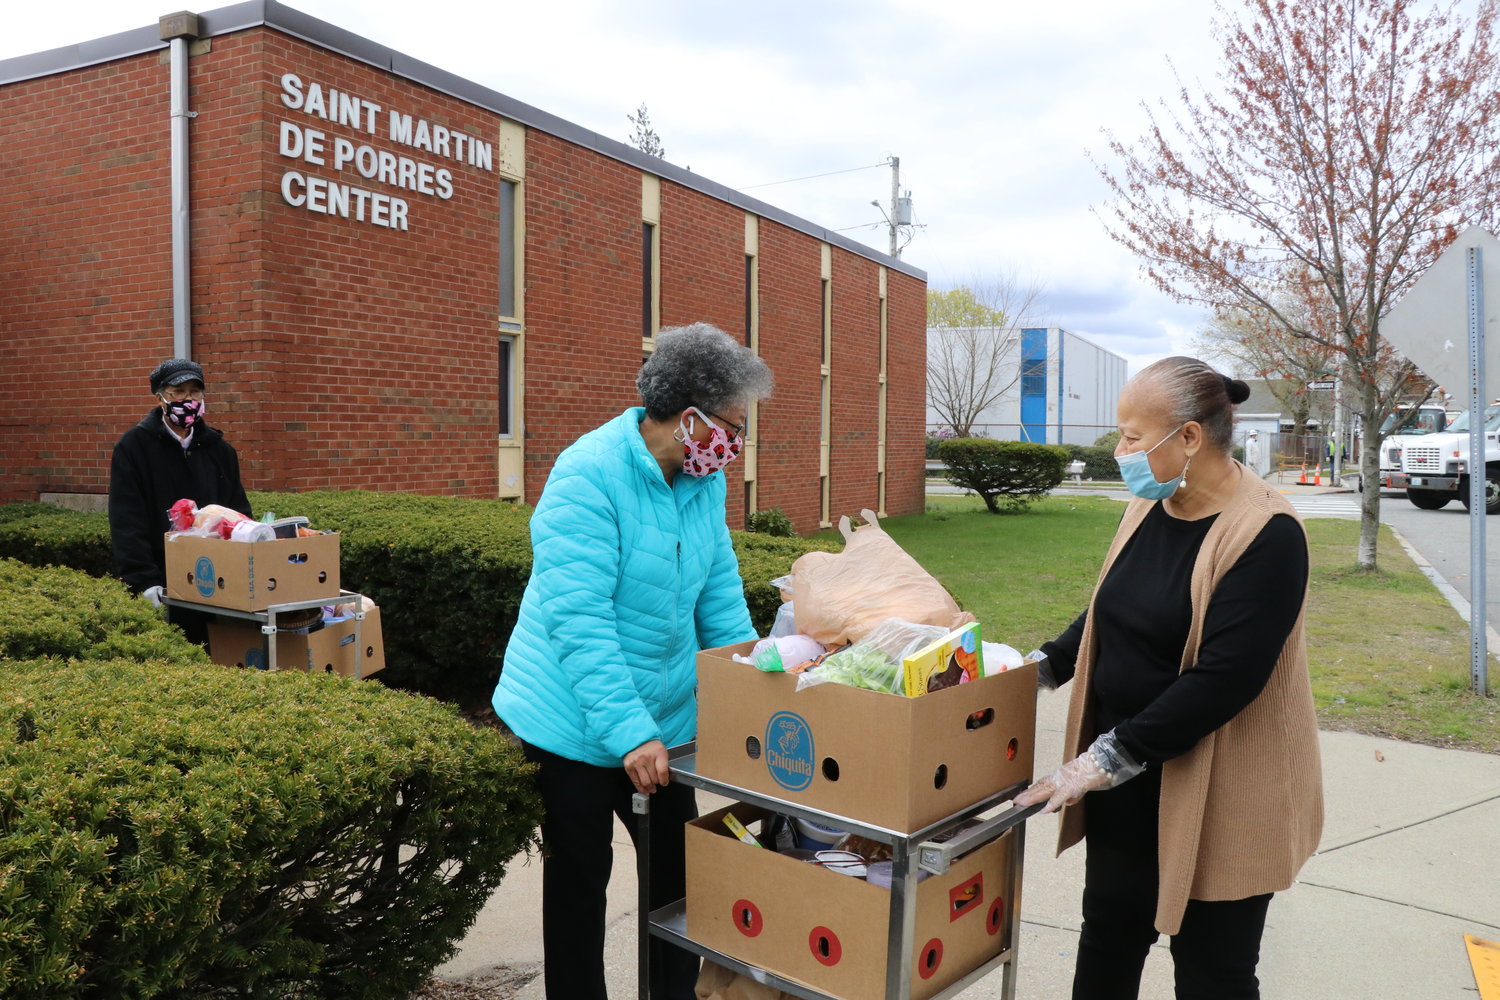 In 2020, Linda A’Vant-Deishinni, director of the St. Martin de Porres Center, right, helps volunteers Cheryl Gray, left, and Gail Harris move boxes of food for distribution to homebound seniors in the midst of the Covid-19 pandemic.